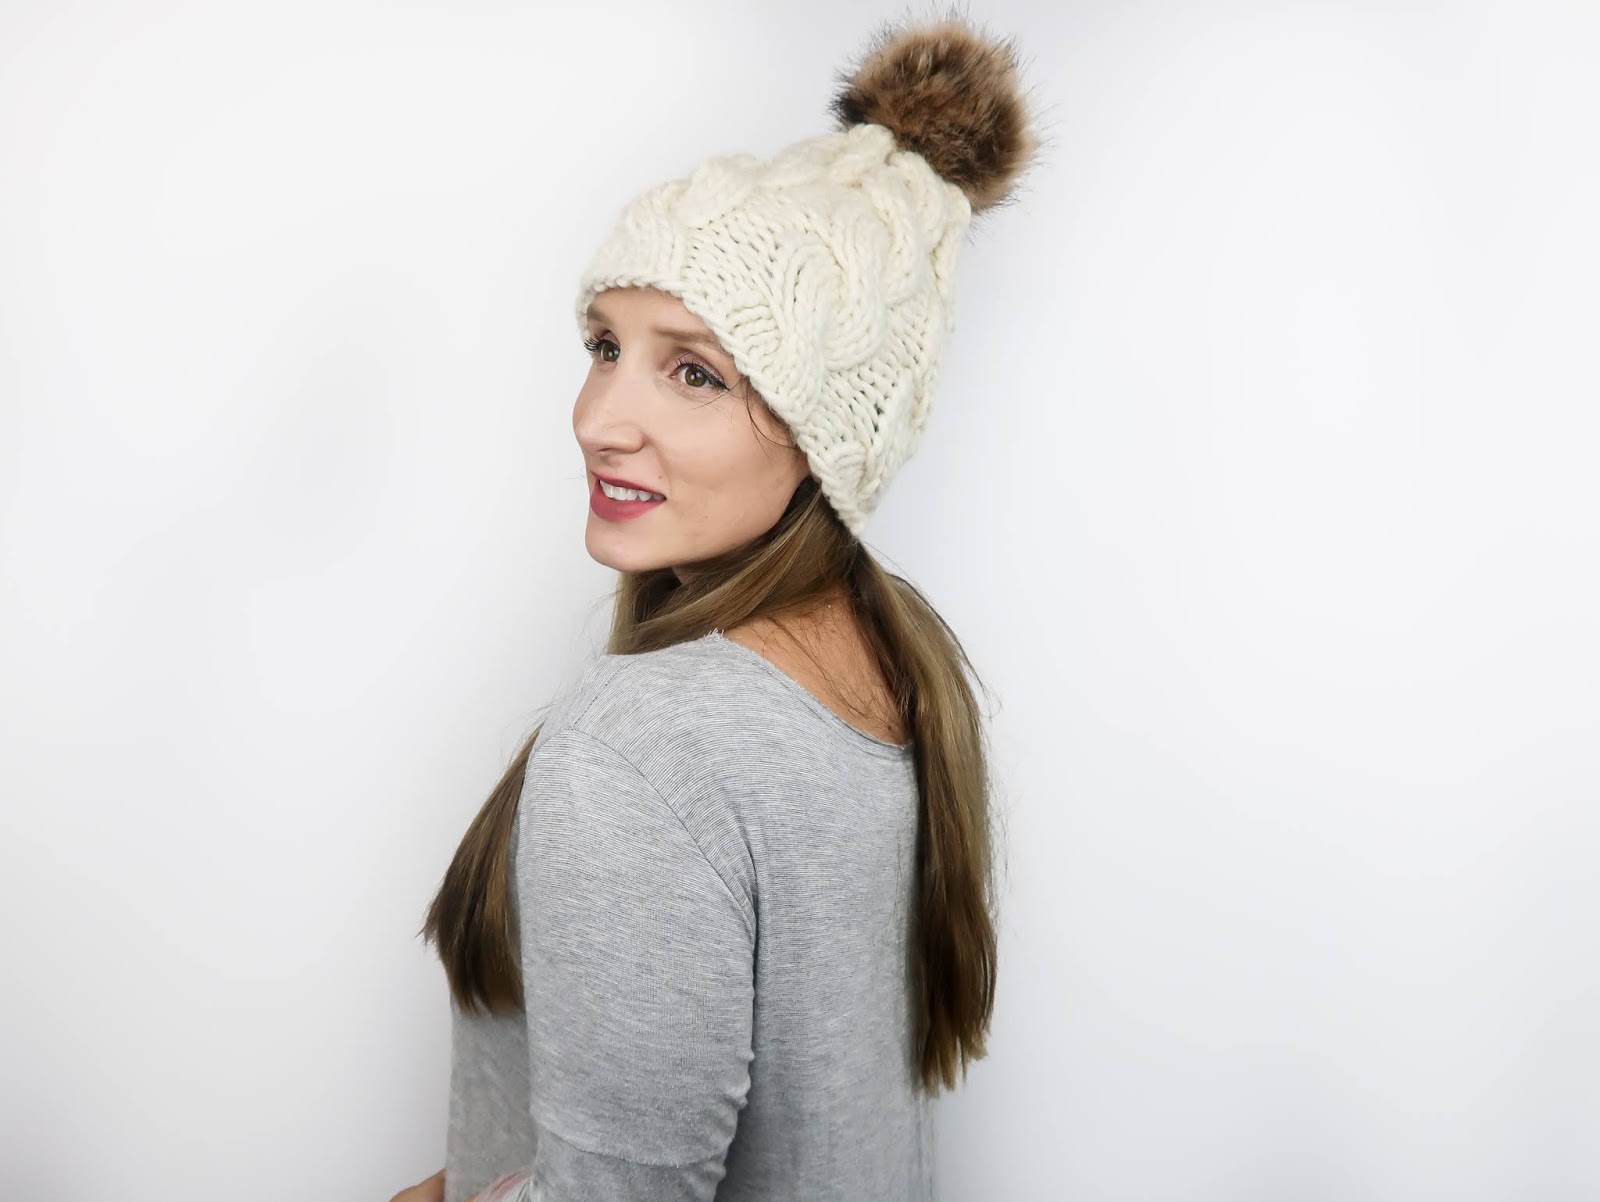 KNIT CABLE & BRAIDED BEANIES | FREE PATTERN & VIDEO TUTORIAL - iKNITS